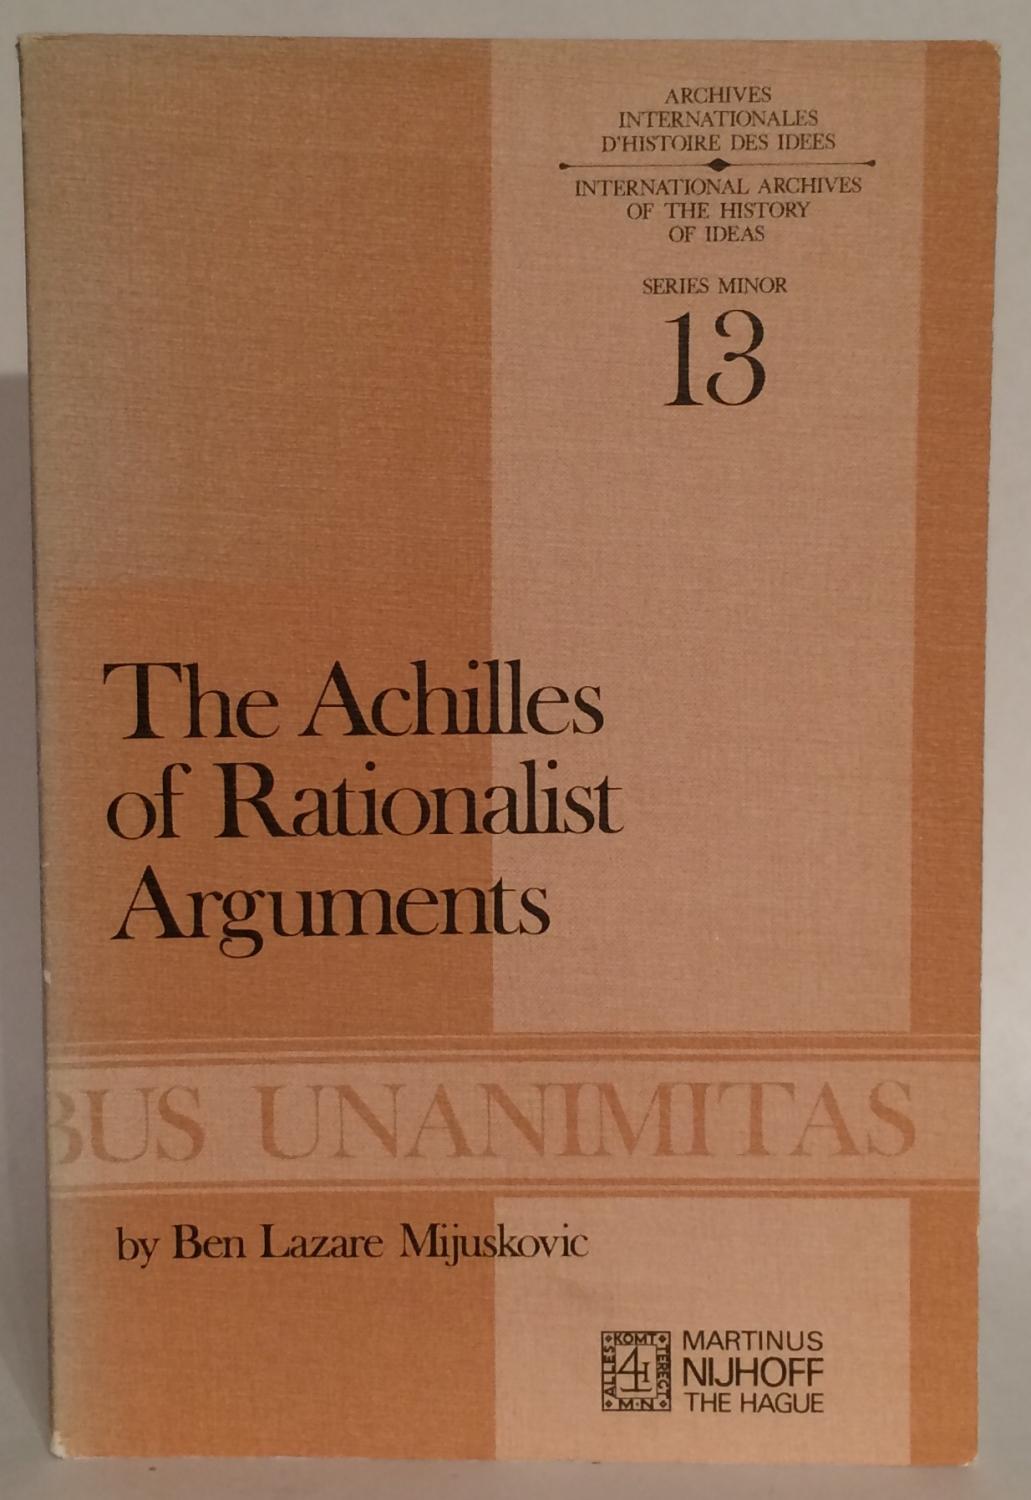 The Achilles of Rationalist Arguments. The Simplicity, Unity, and Identity of Thought and Soul from the Cambridge Platonists to Kant. A Study in the History of Argument. - Mijuskovic, Ben Lazare